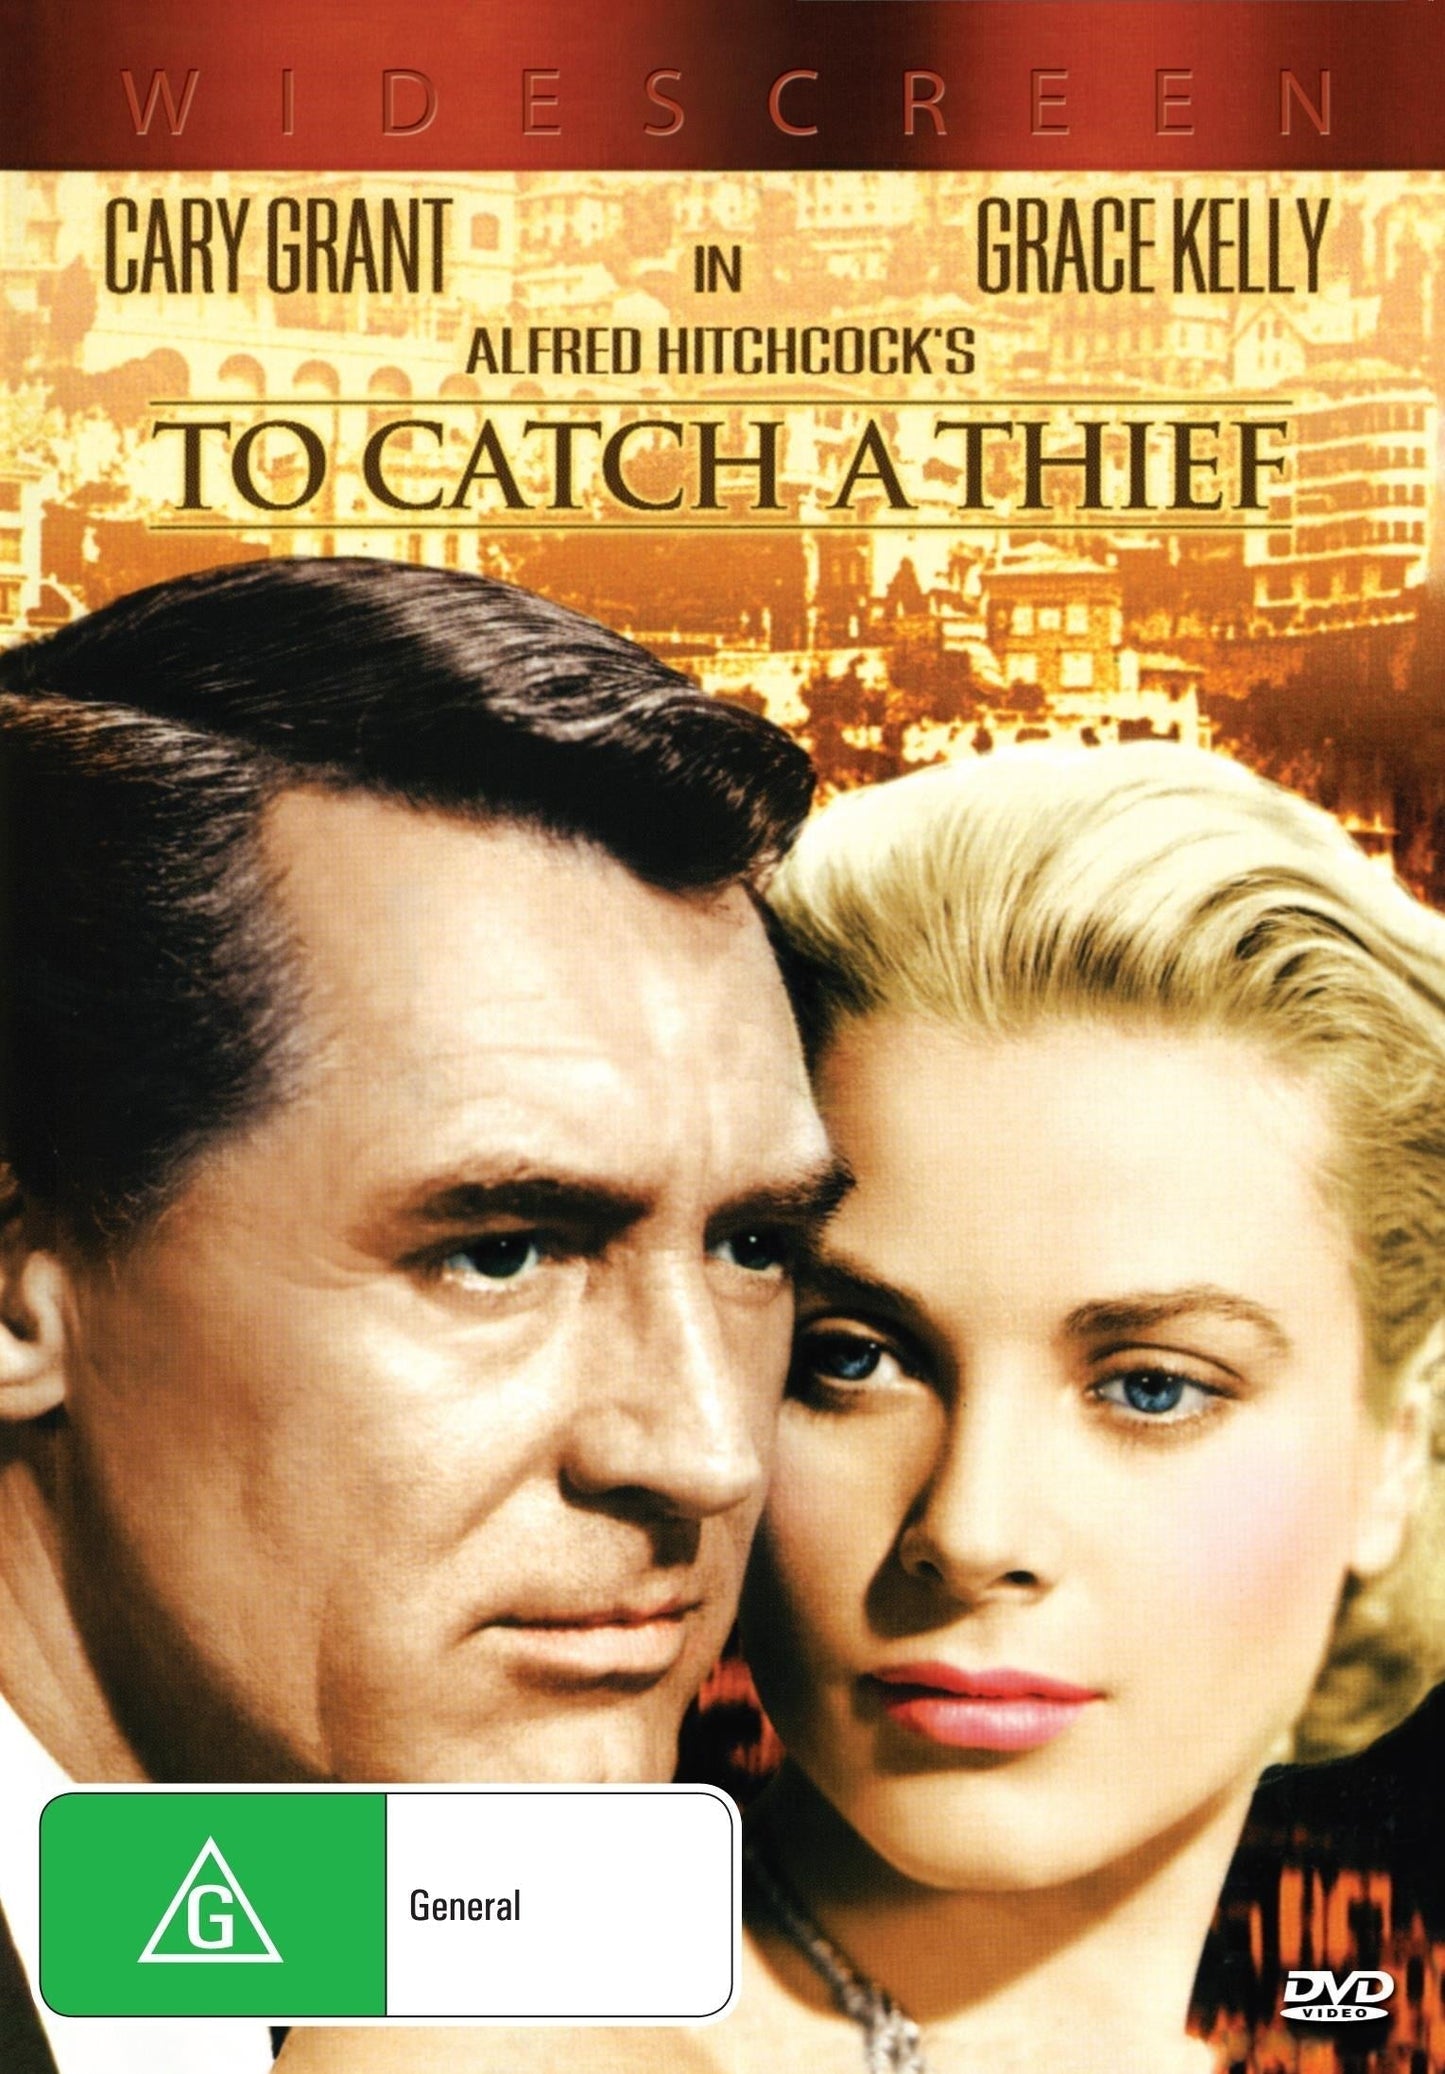 To Catch A Thief rareandcollectibledvds